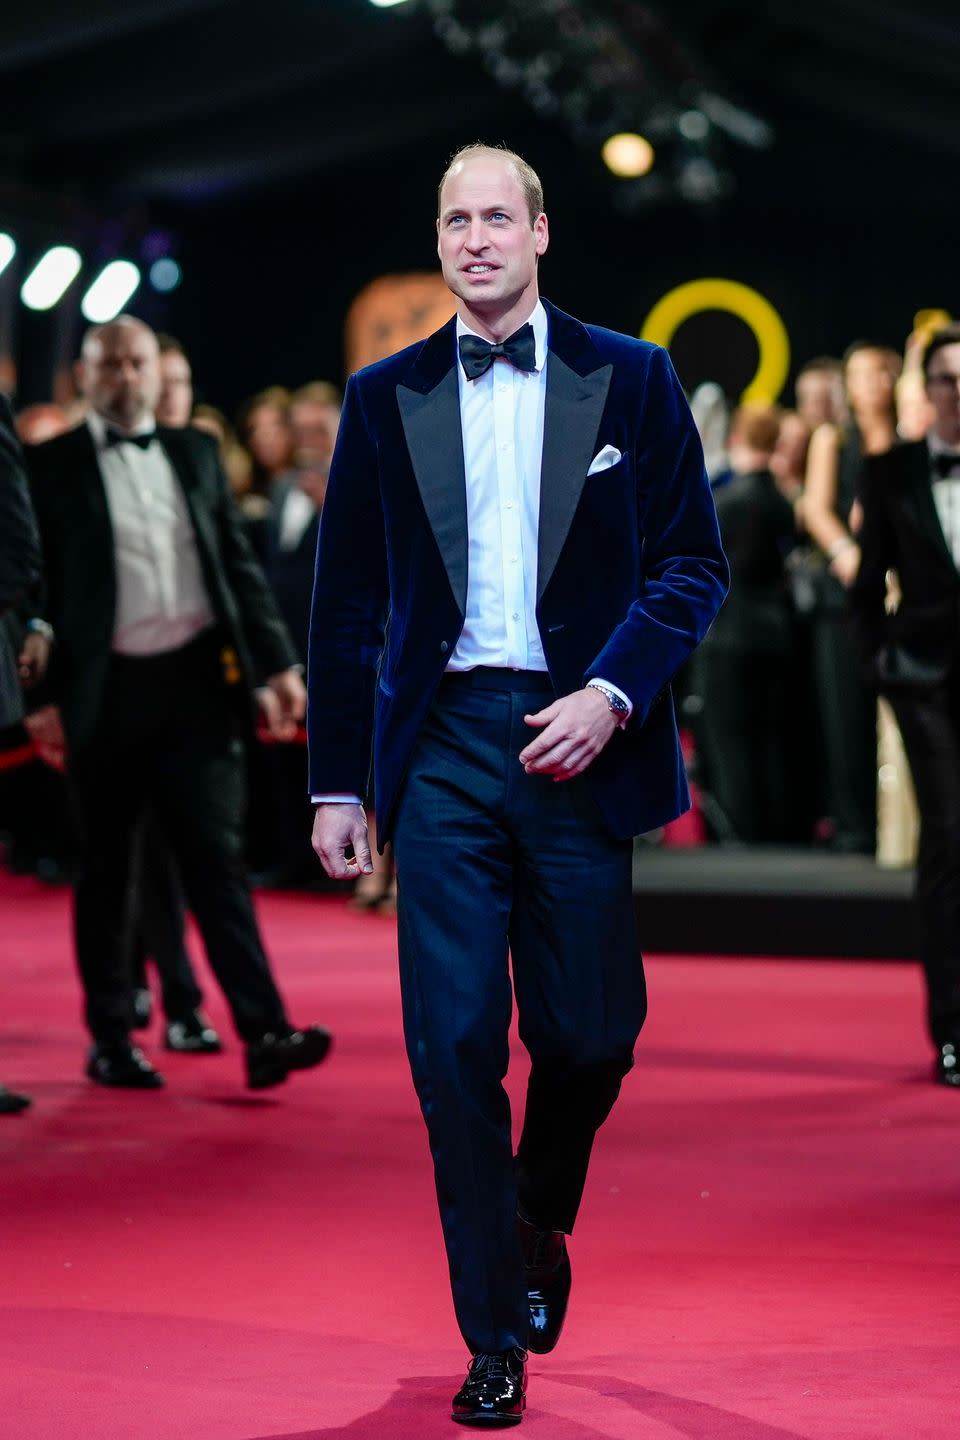 prince william walks on a red carpet while looking slightly up and smiling, he wears a blue velget suit with a bow tie and white collared shirt